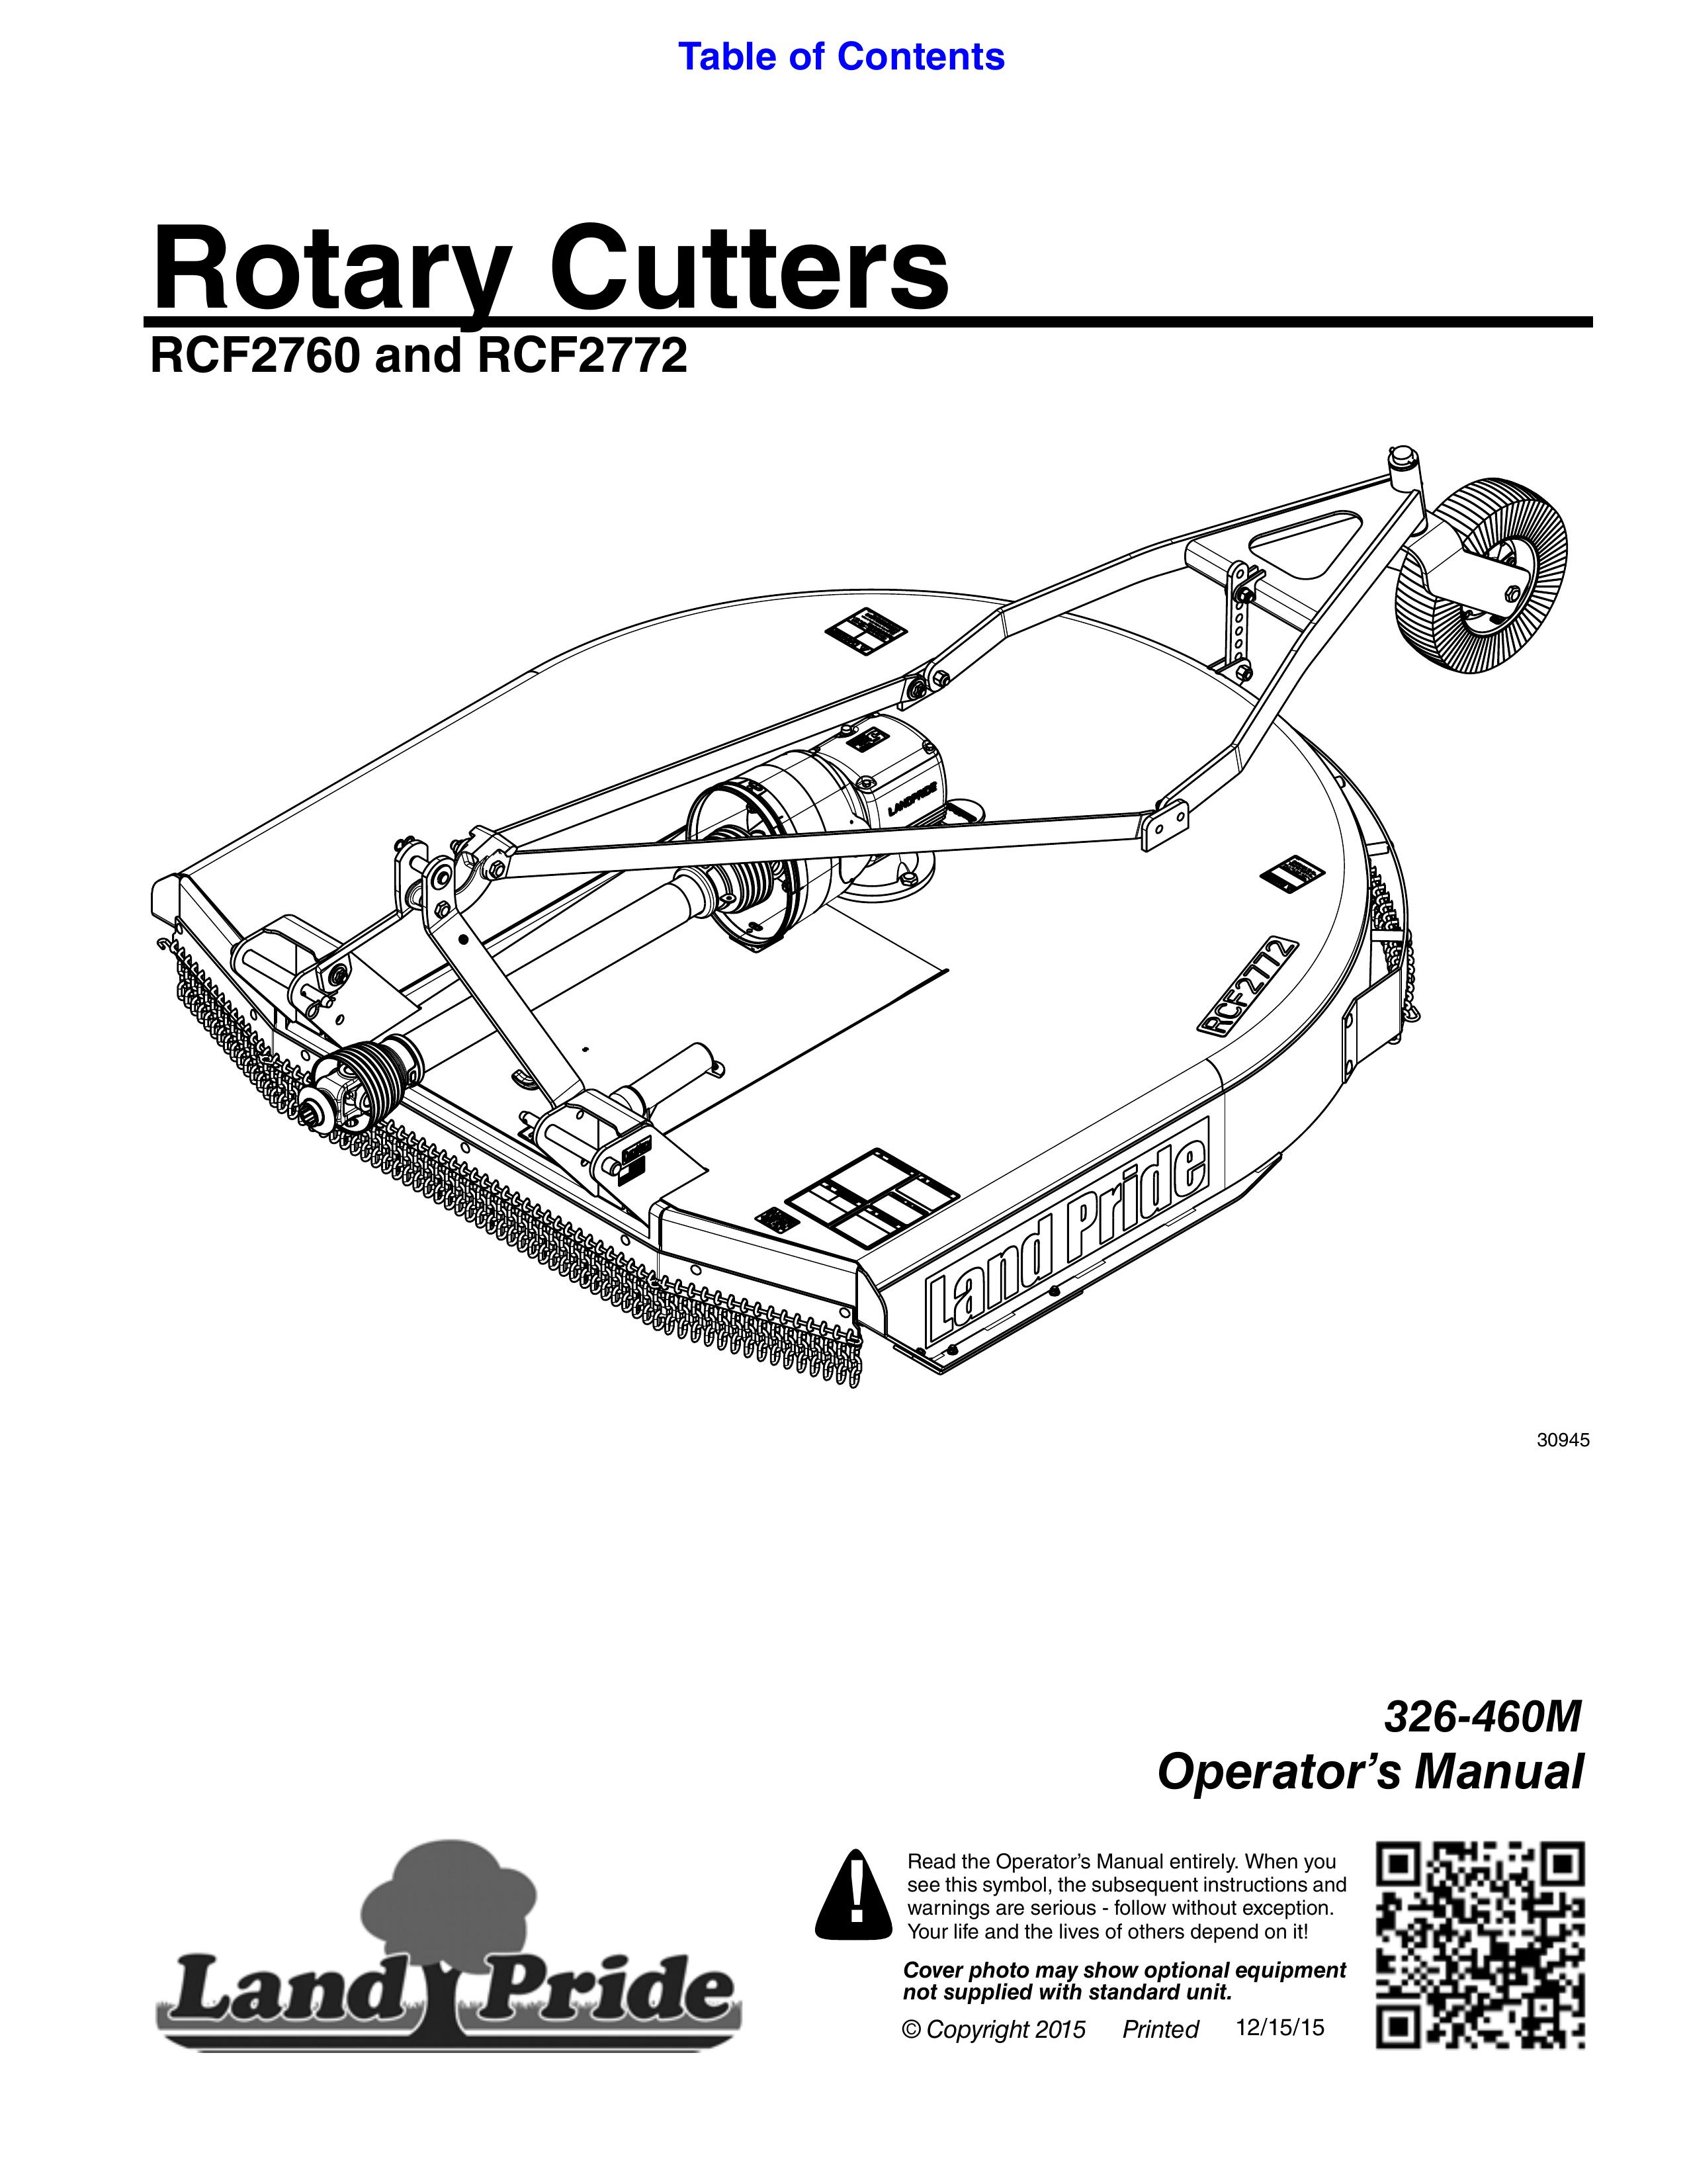 Land Pride RCF2760 and RCF2772 Brush Cutter User Manual